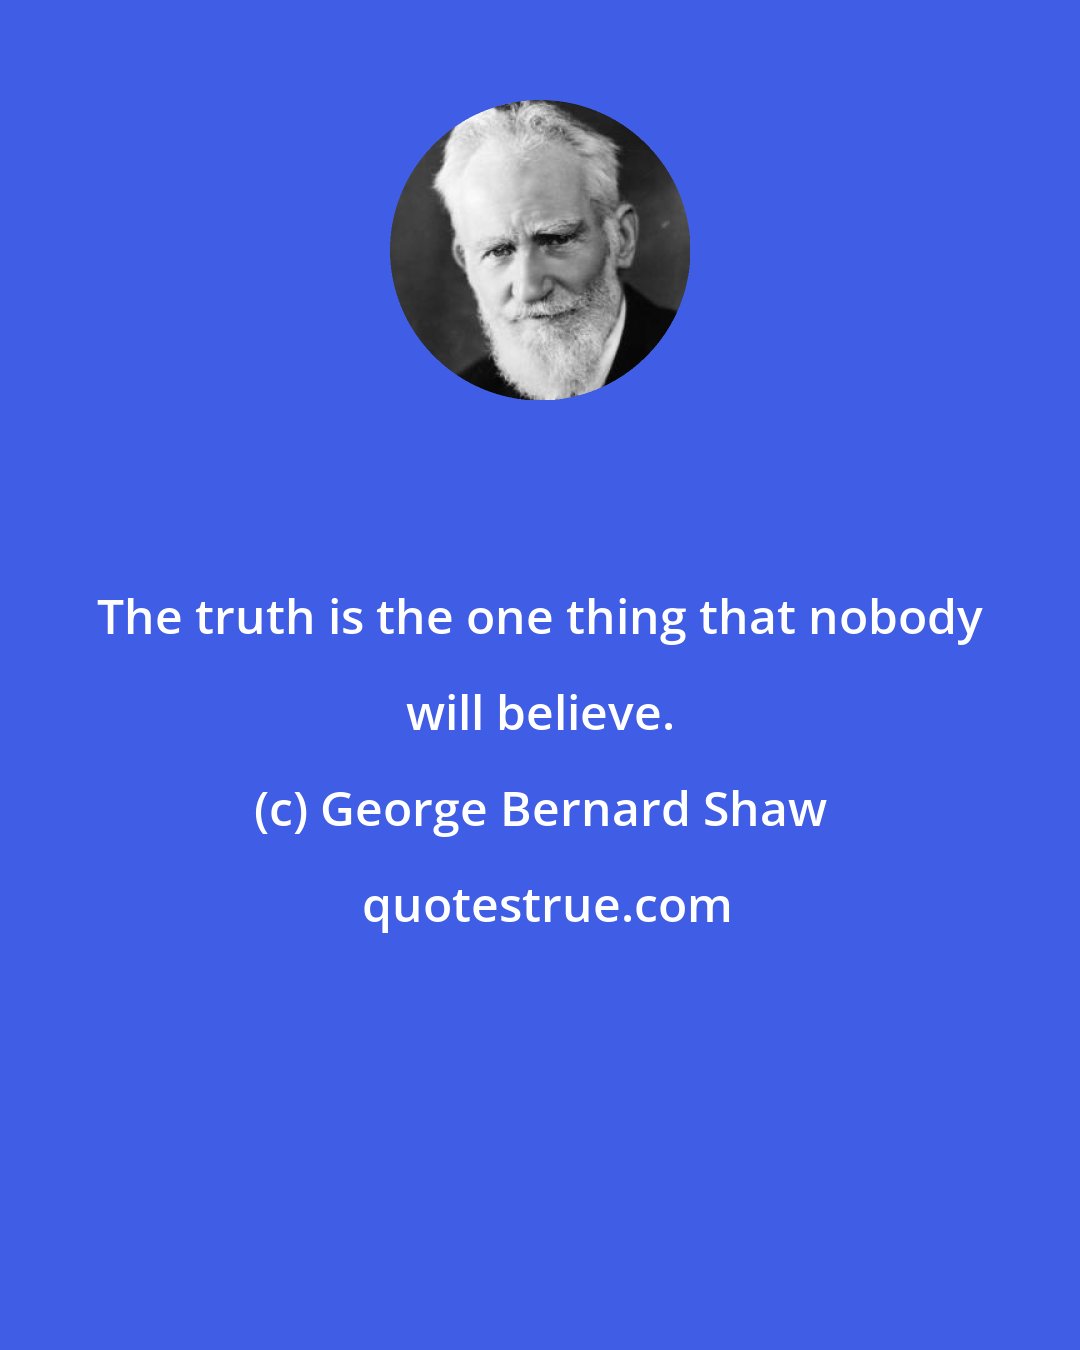 George Bernard Shaw: The truth is the one thing that nobody will believe.